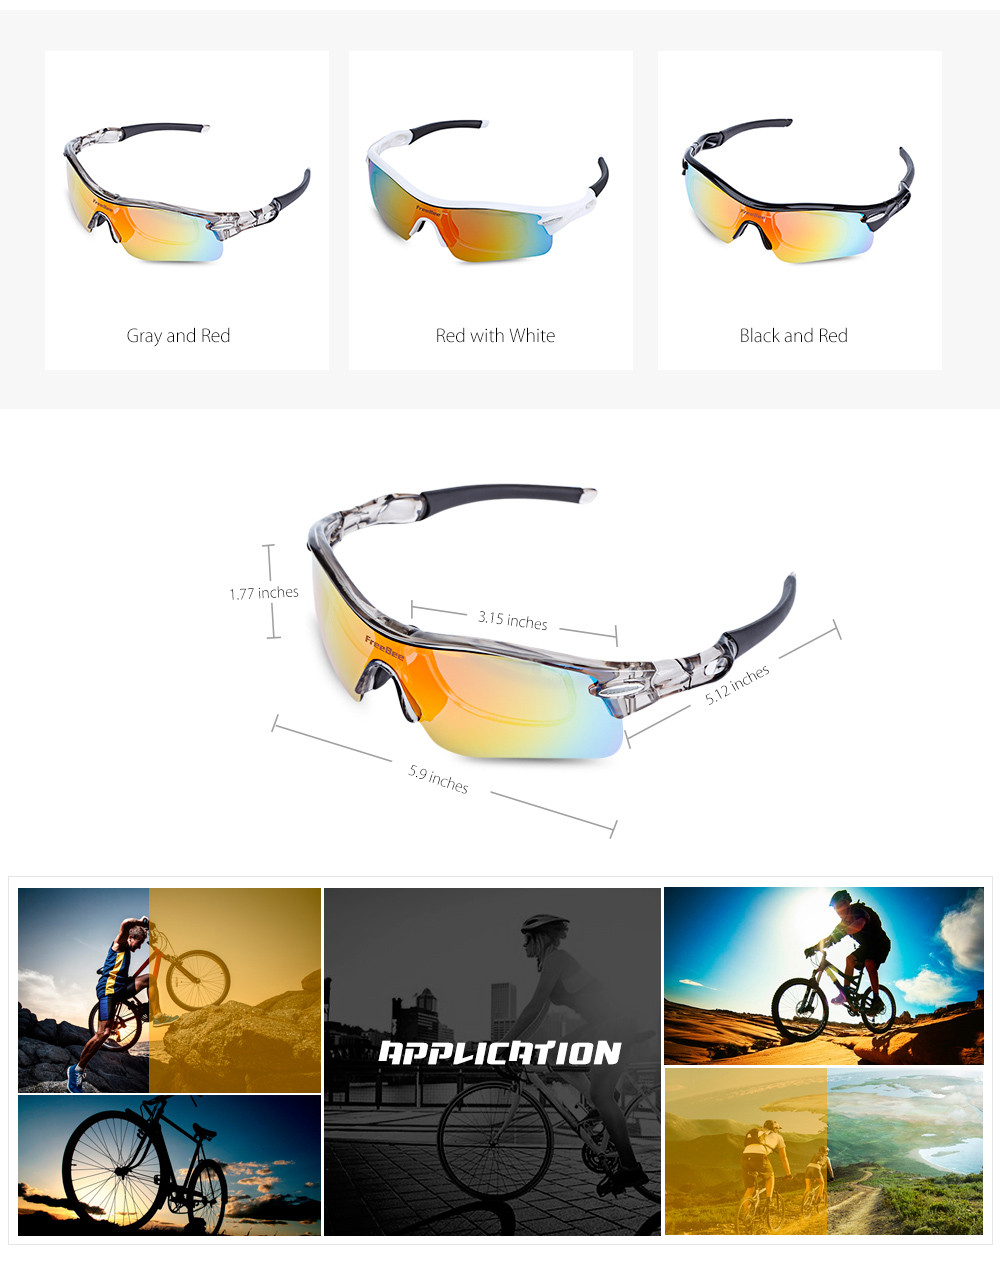 FreeBee Outdoor Cycling Glasses UV Protection Sunglasses with 5 Interchangeable Lenses